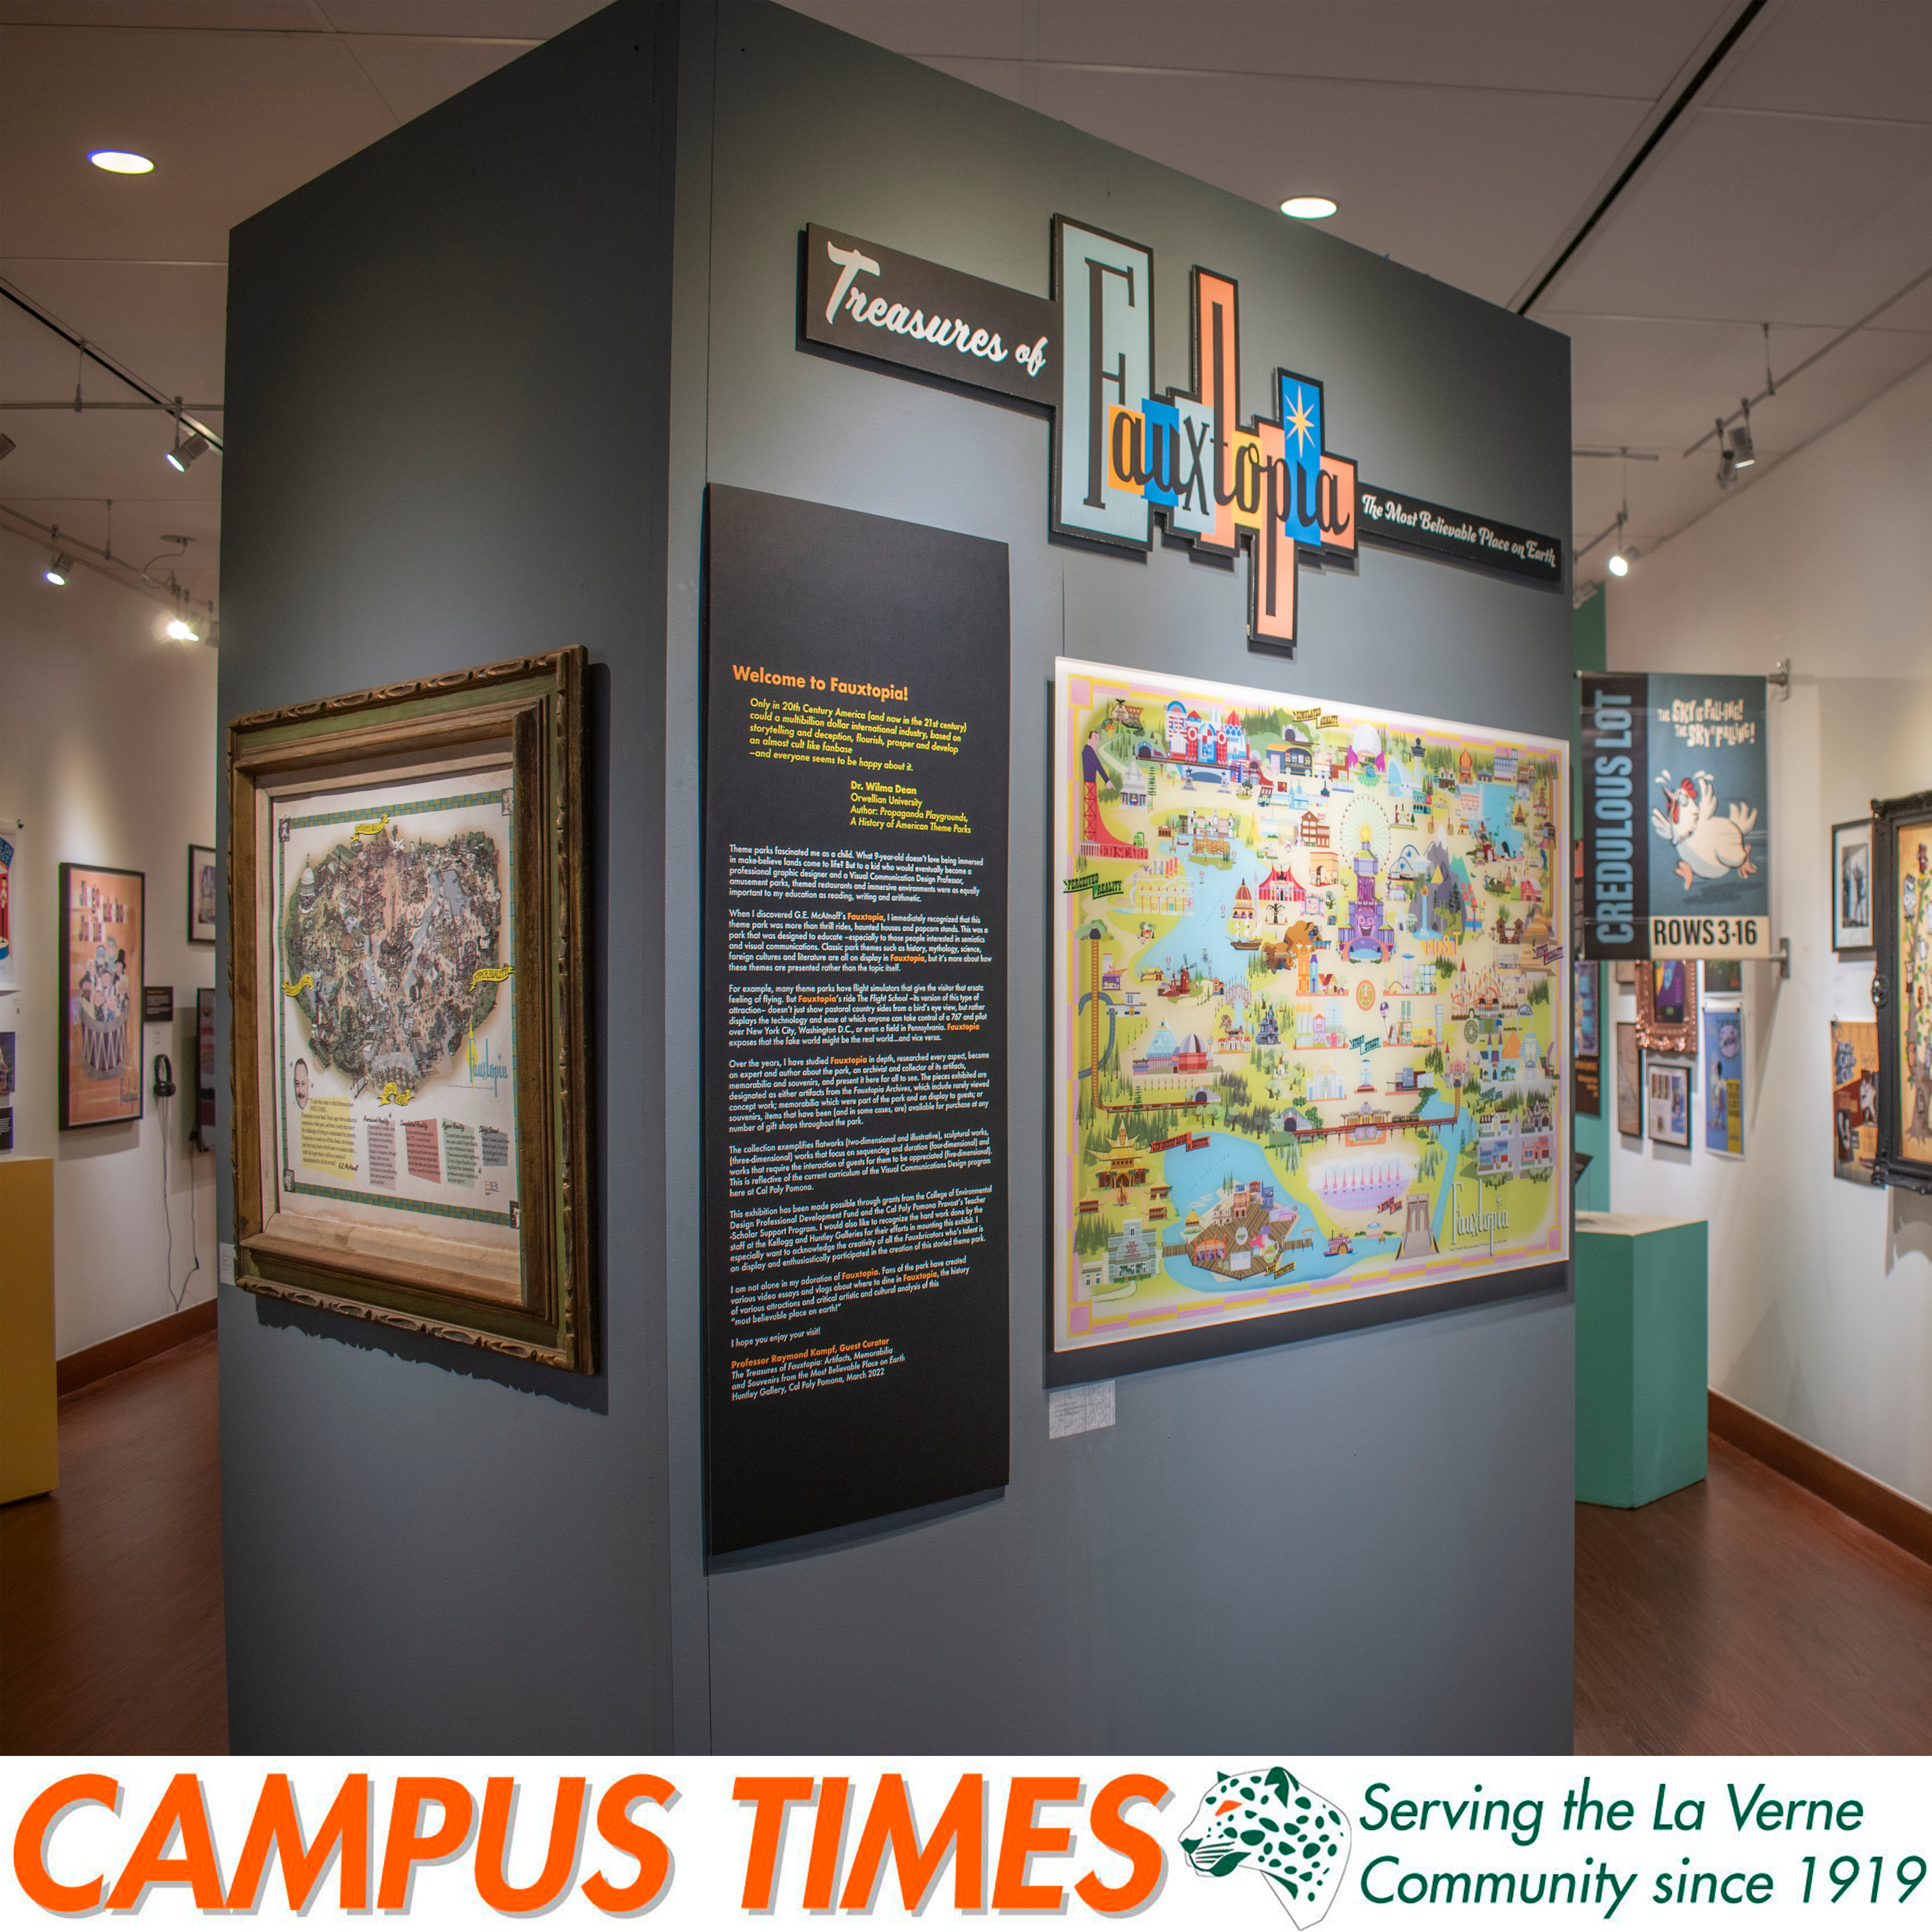 Treasures of Fauxtopia Artifacts, Memorabilia and Souvenirs from The Most Believable Place on Earth Guest Curated by Prof. Raymond Kampf, Campus Reception: Thursday, April 7, 4-6pm